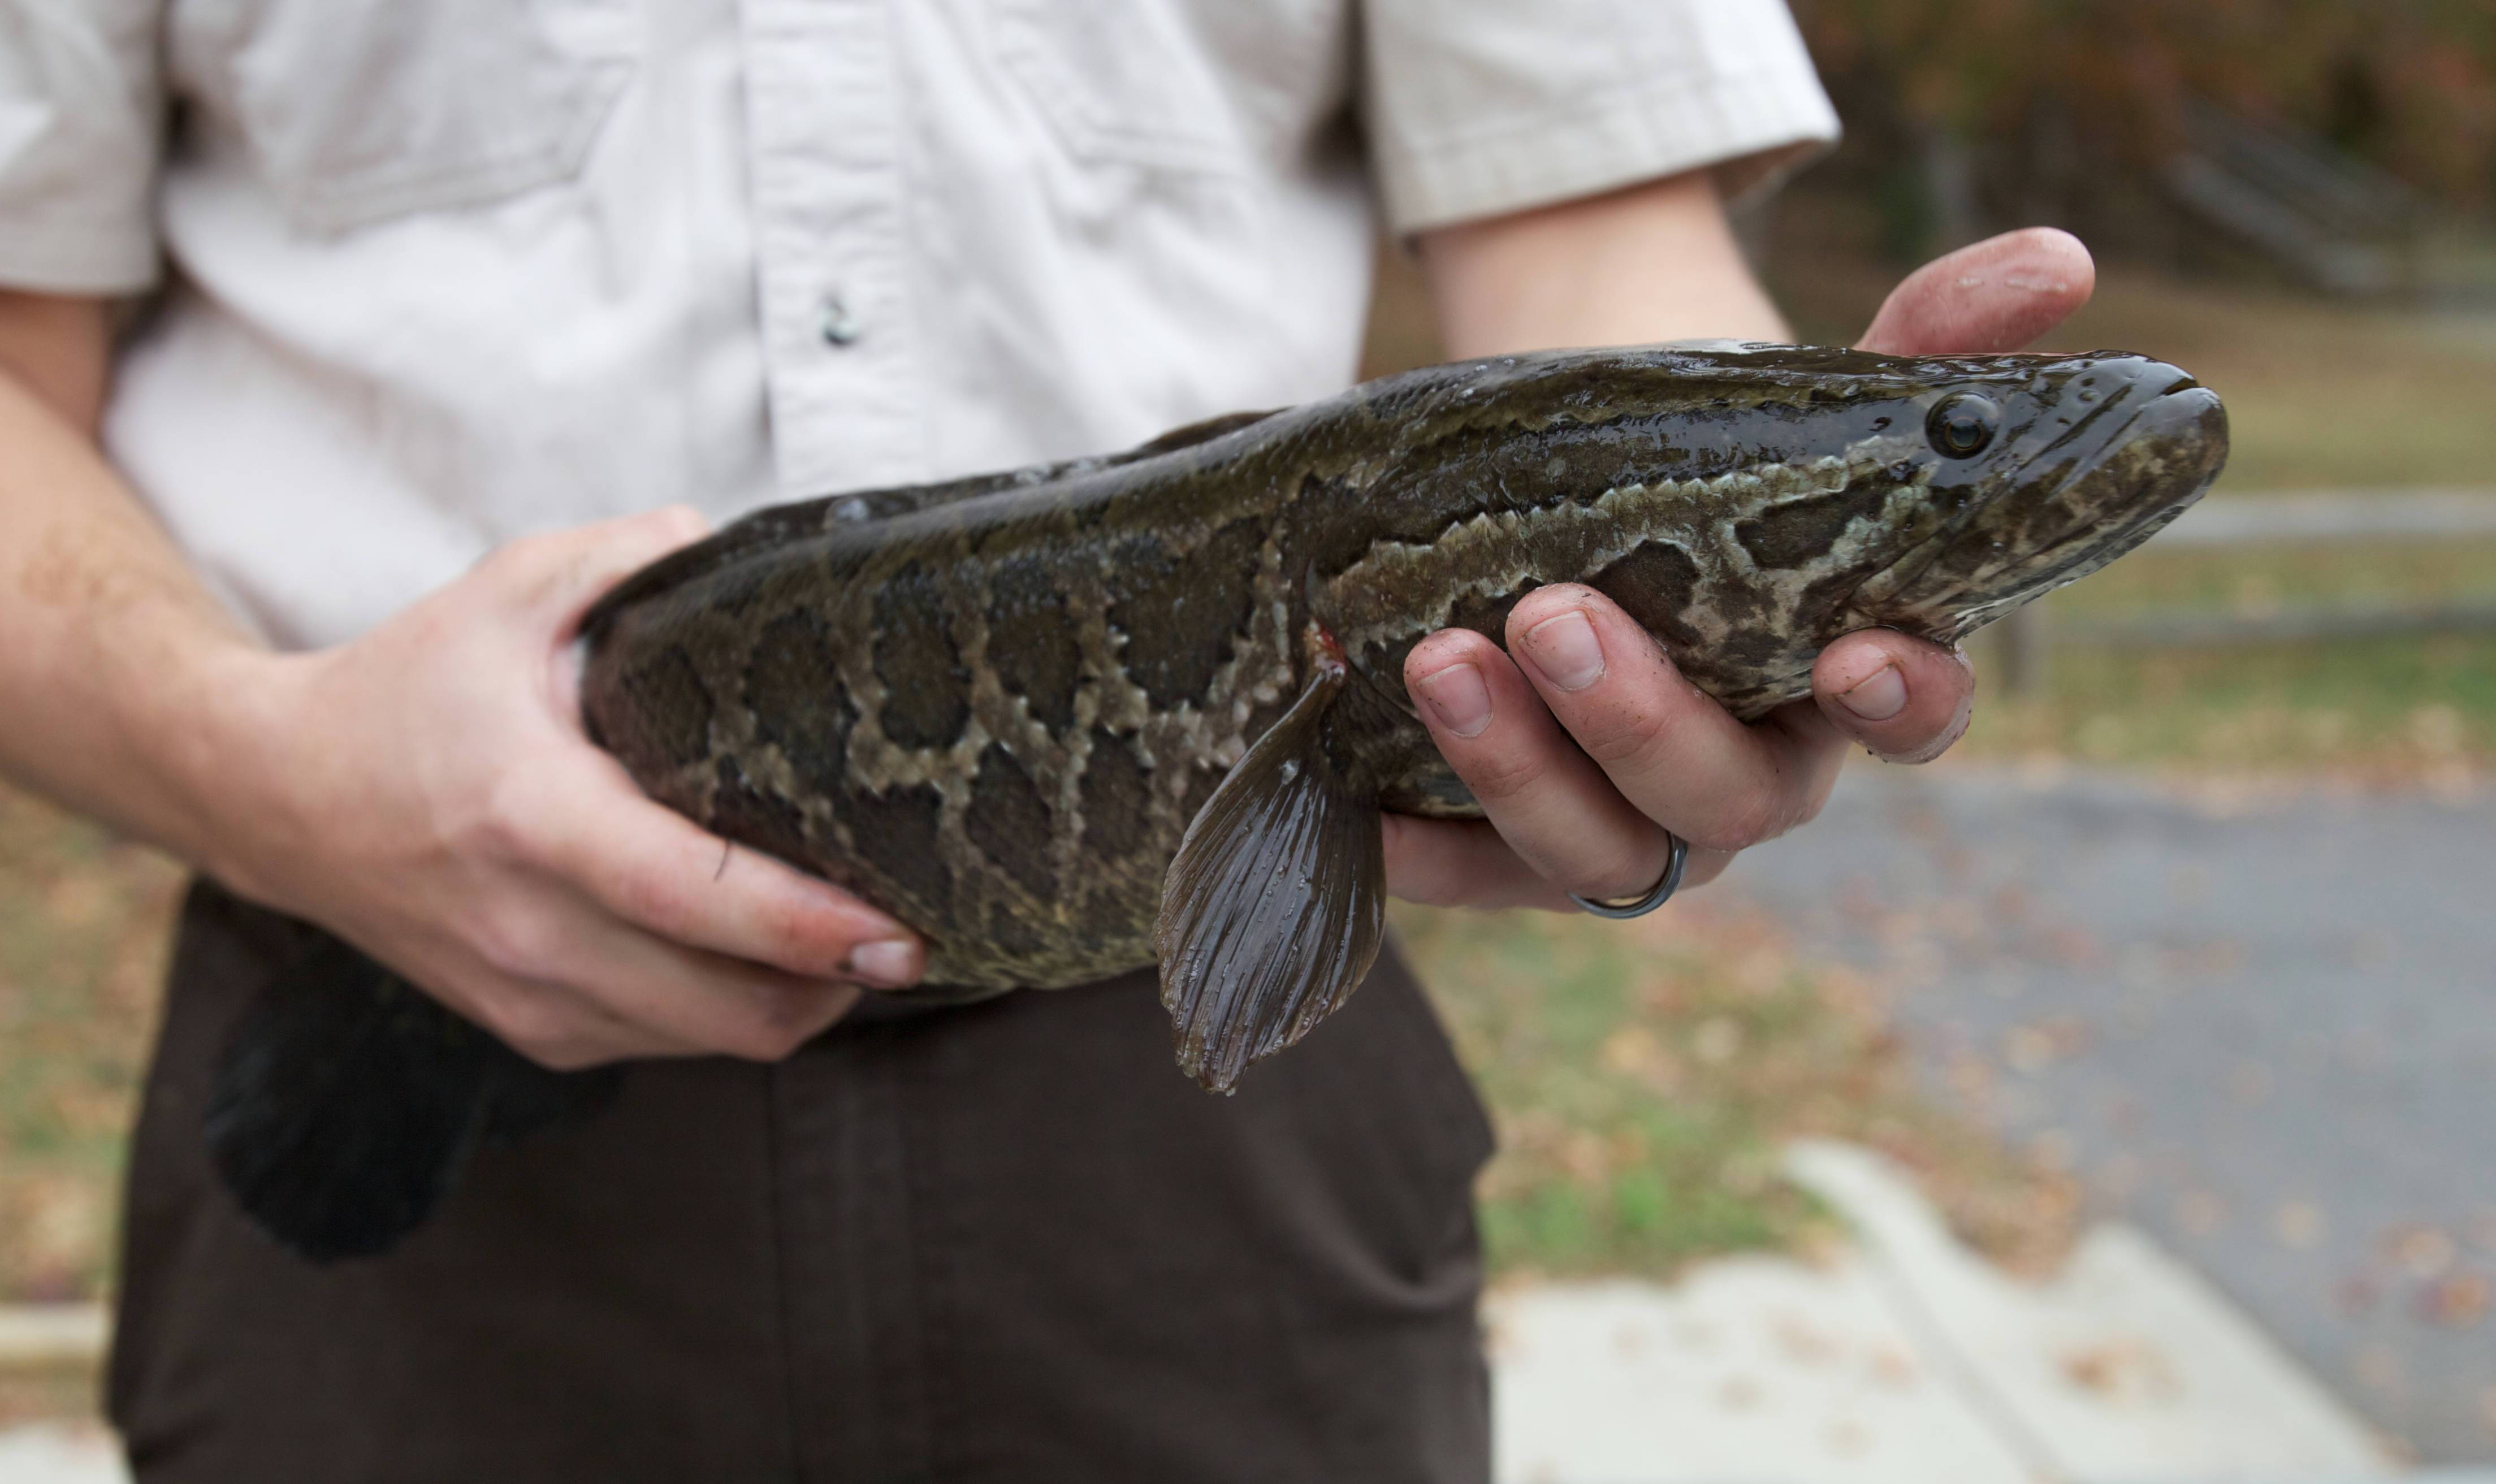 A U.S. Fish and Wildlife Service biologist a northern snakehead fish in Maryland. The fish's scientific name is Channa argus and in 2024, Maryland lawmakers are considering giving it a new common name: "Chesapeake channa."